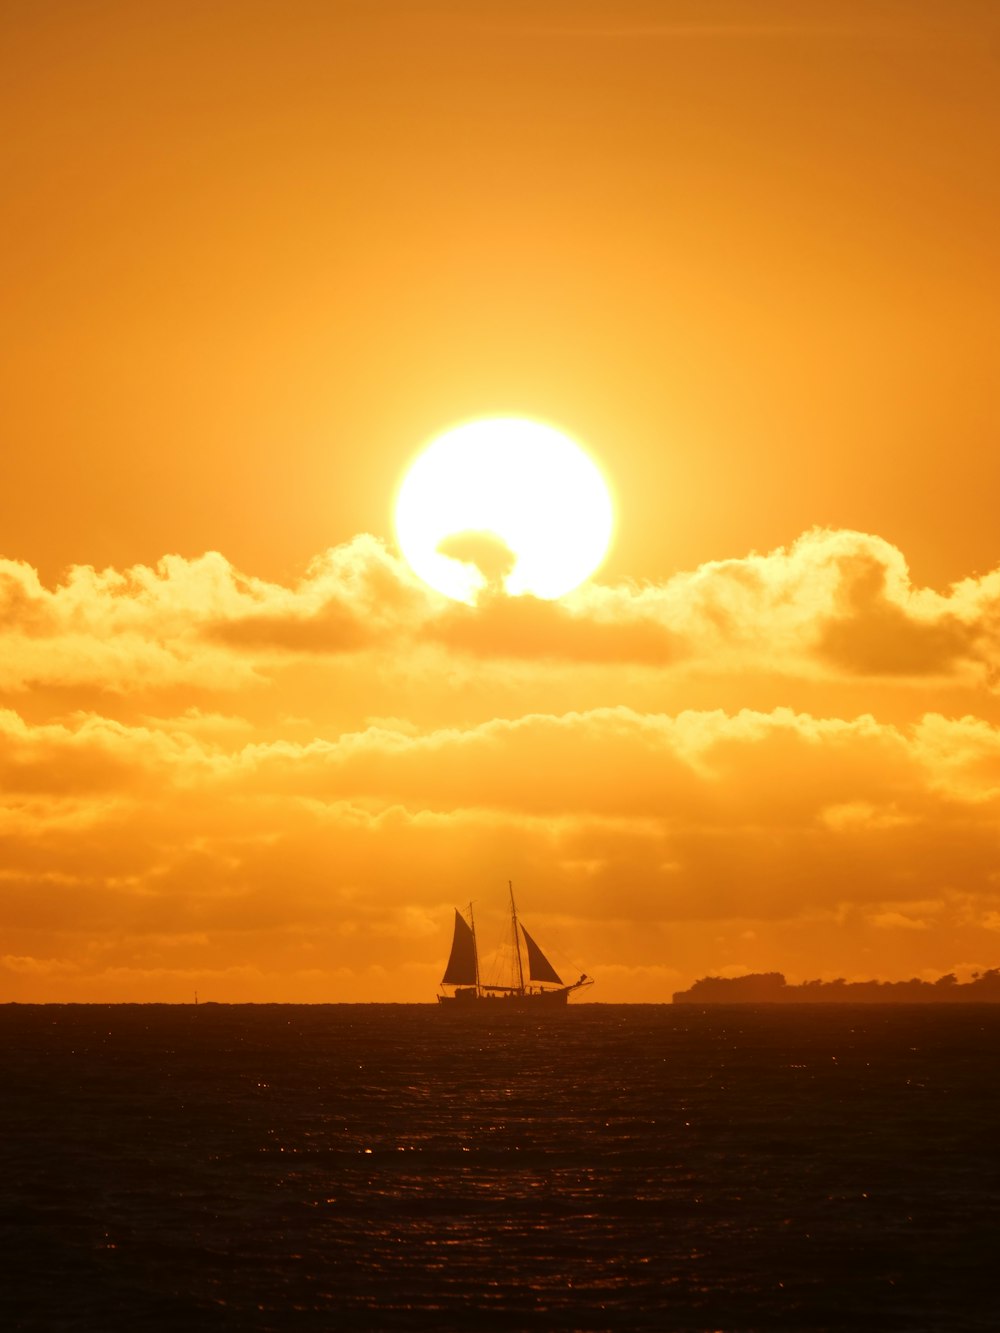 a sailboat in the ocean with the sun in the background